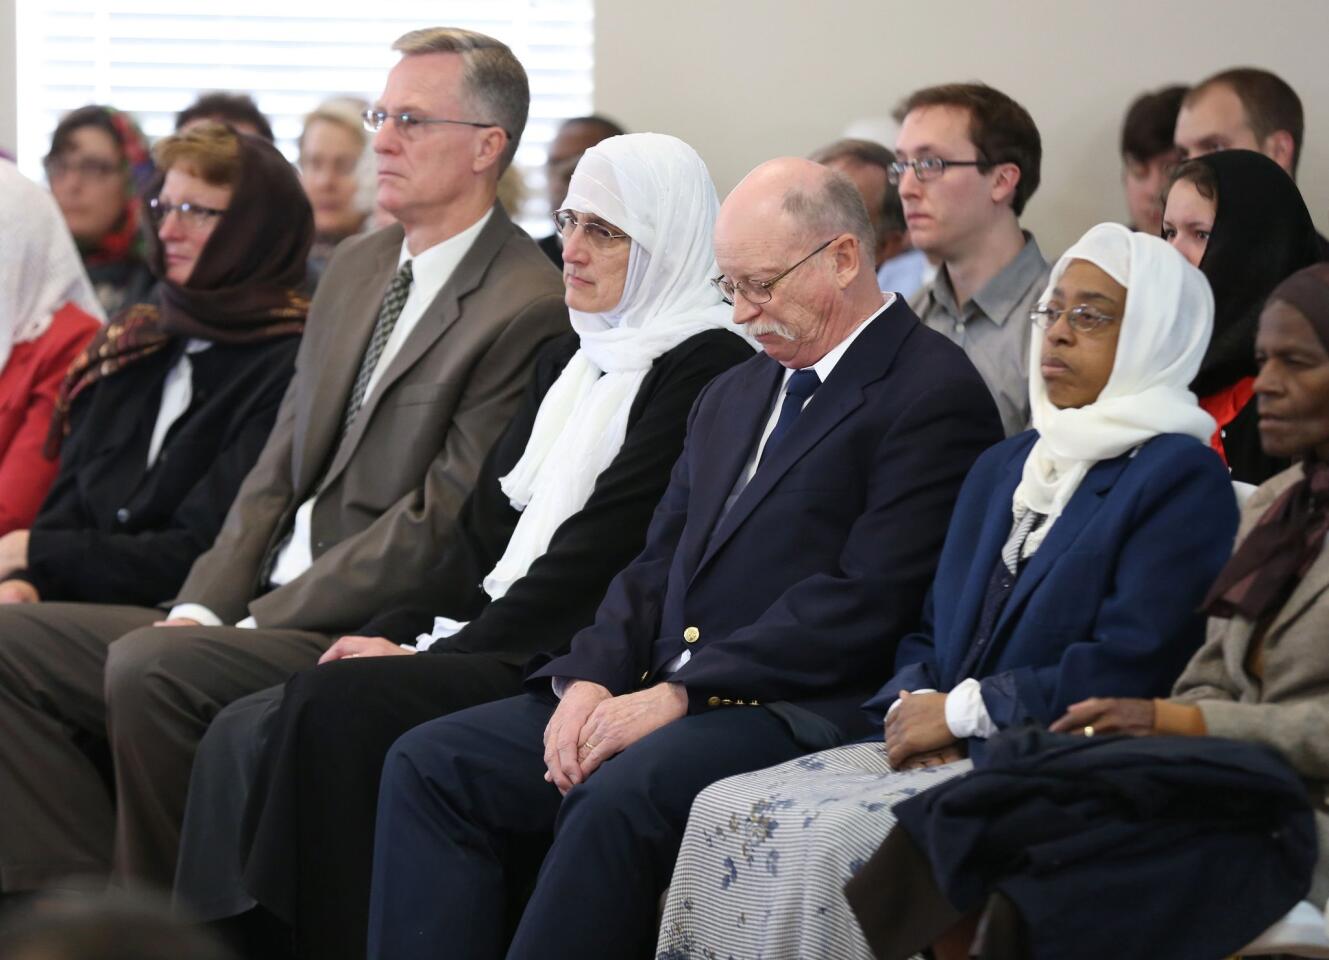 Paula and Ed Kassig attend a prayer service in memory of their son Abdul-Rahman Kassig, whose name was Peter before his conversion to Islam, in Fishers, Indiana.